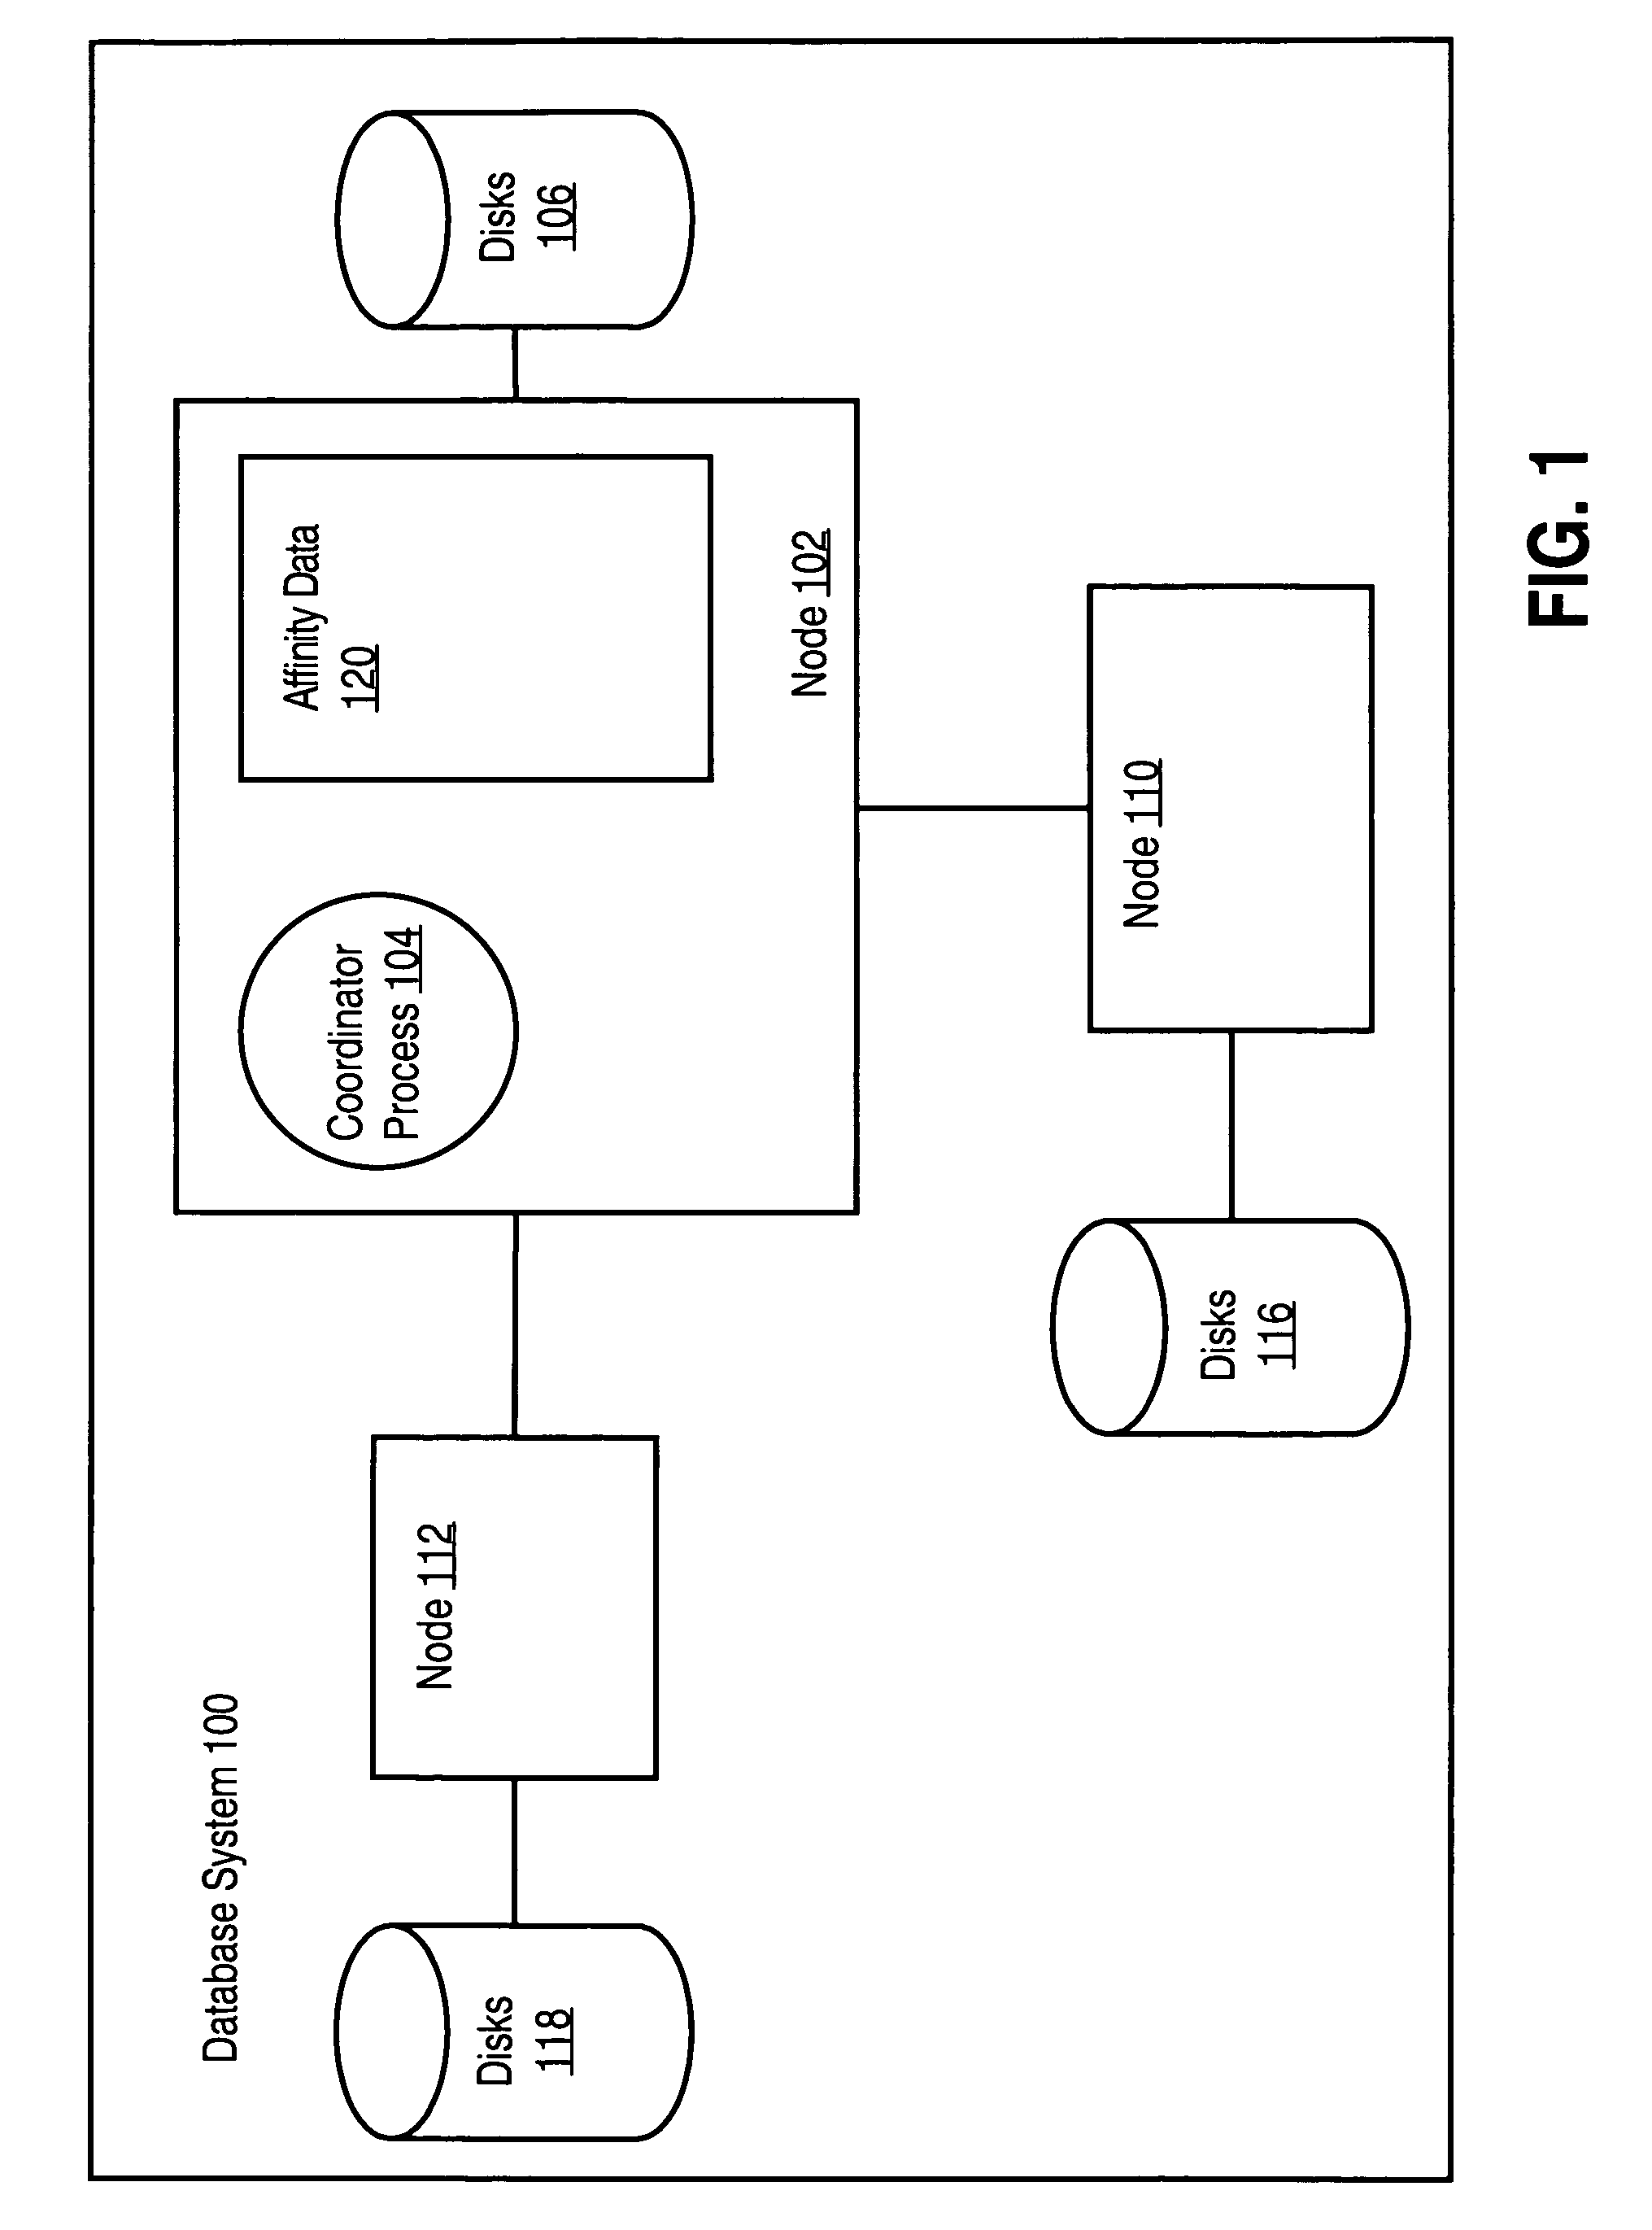 Managing parallel execution of work granules according to their affinity